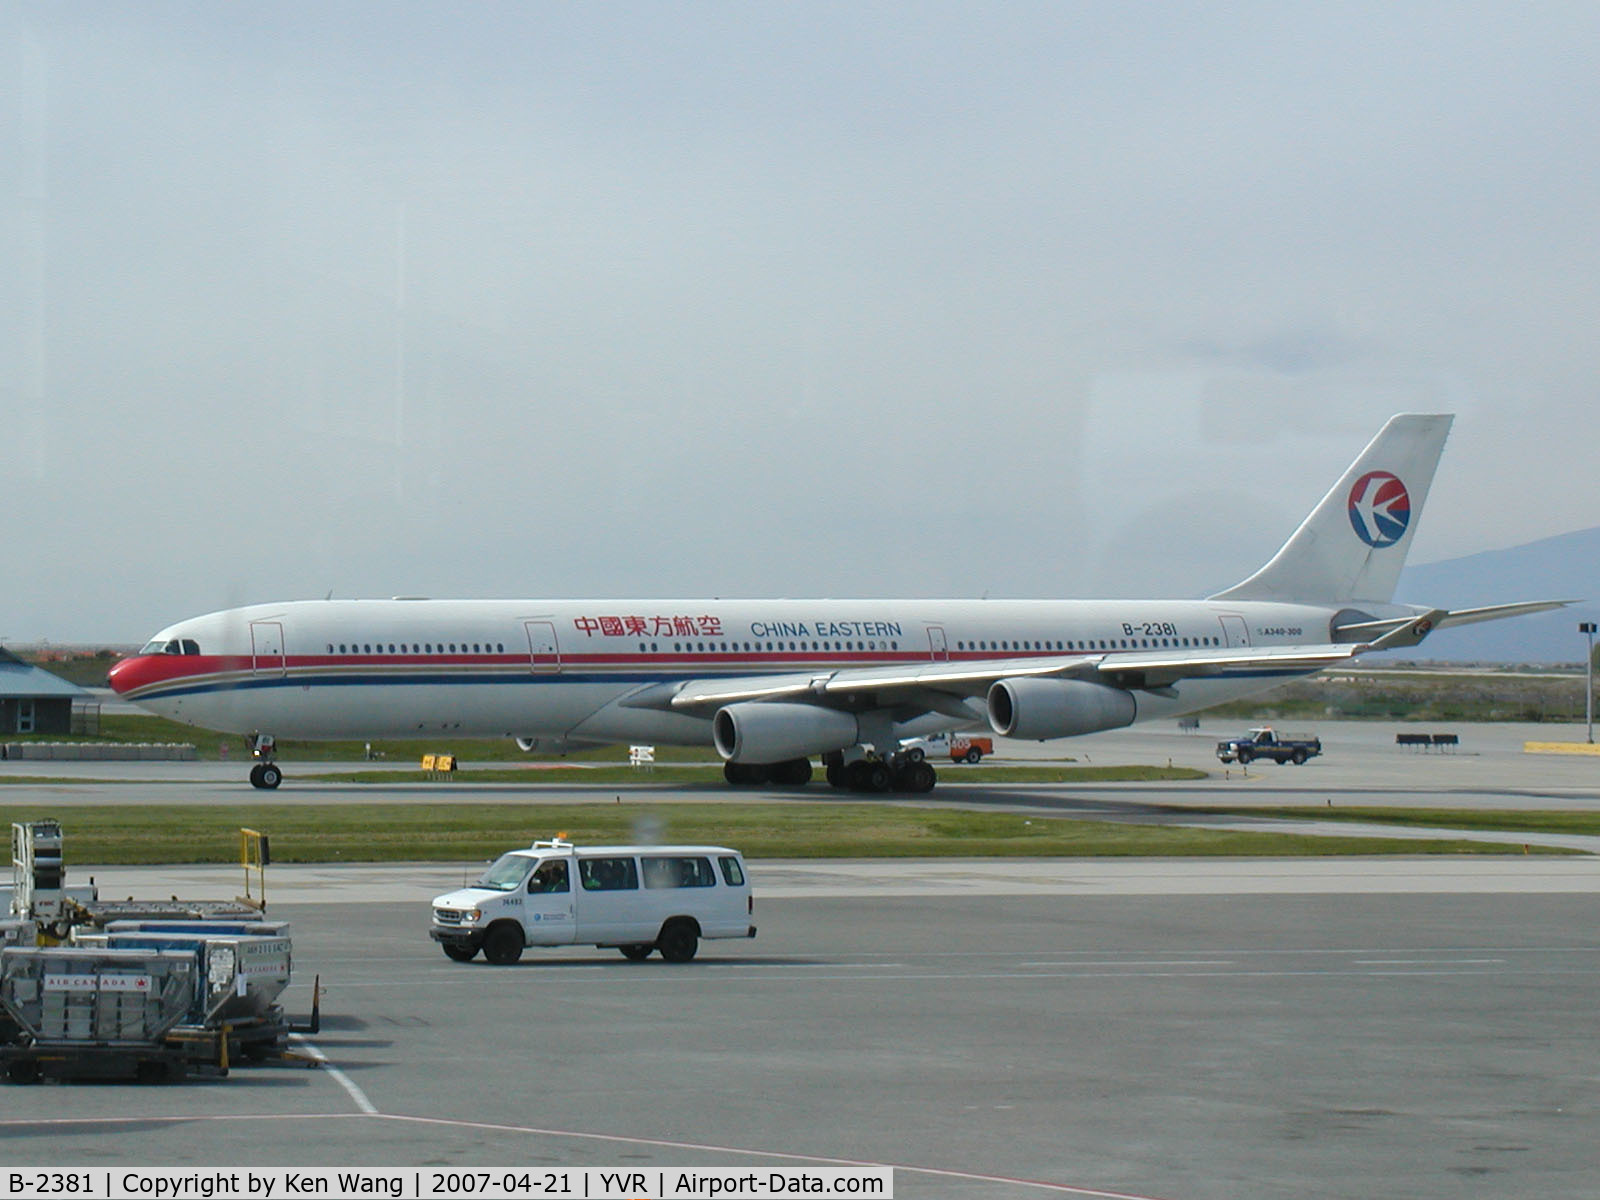 B-2381, 1996 Airbus A340-313X C/N 131, China Eastern Airbus A340 at Vancouver International